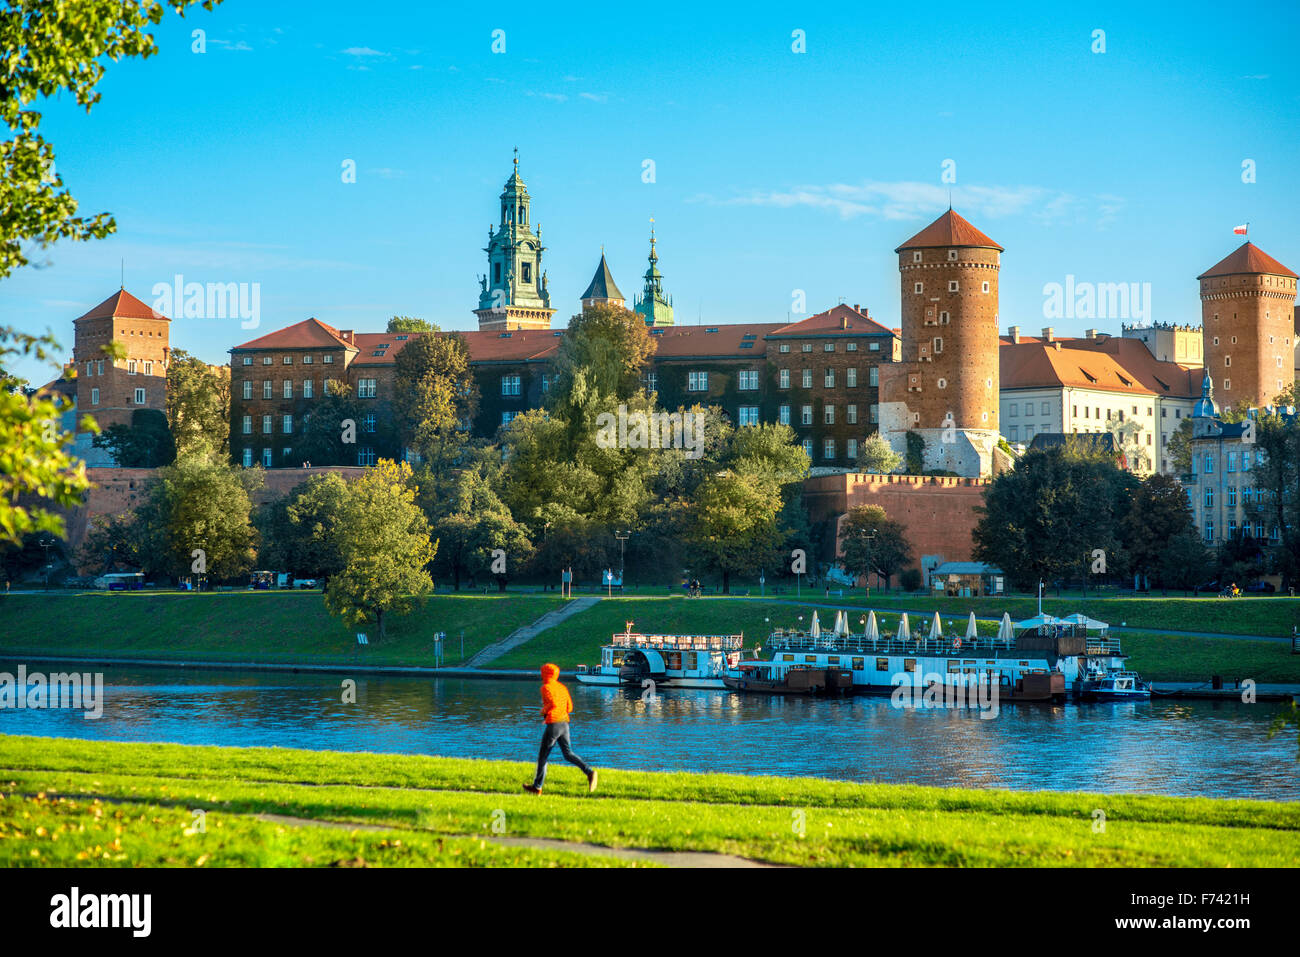 View on Wawel castle from the Vistula river in Krakow on the morning Stock Photo